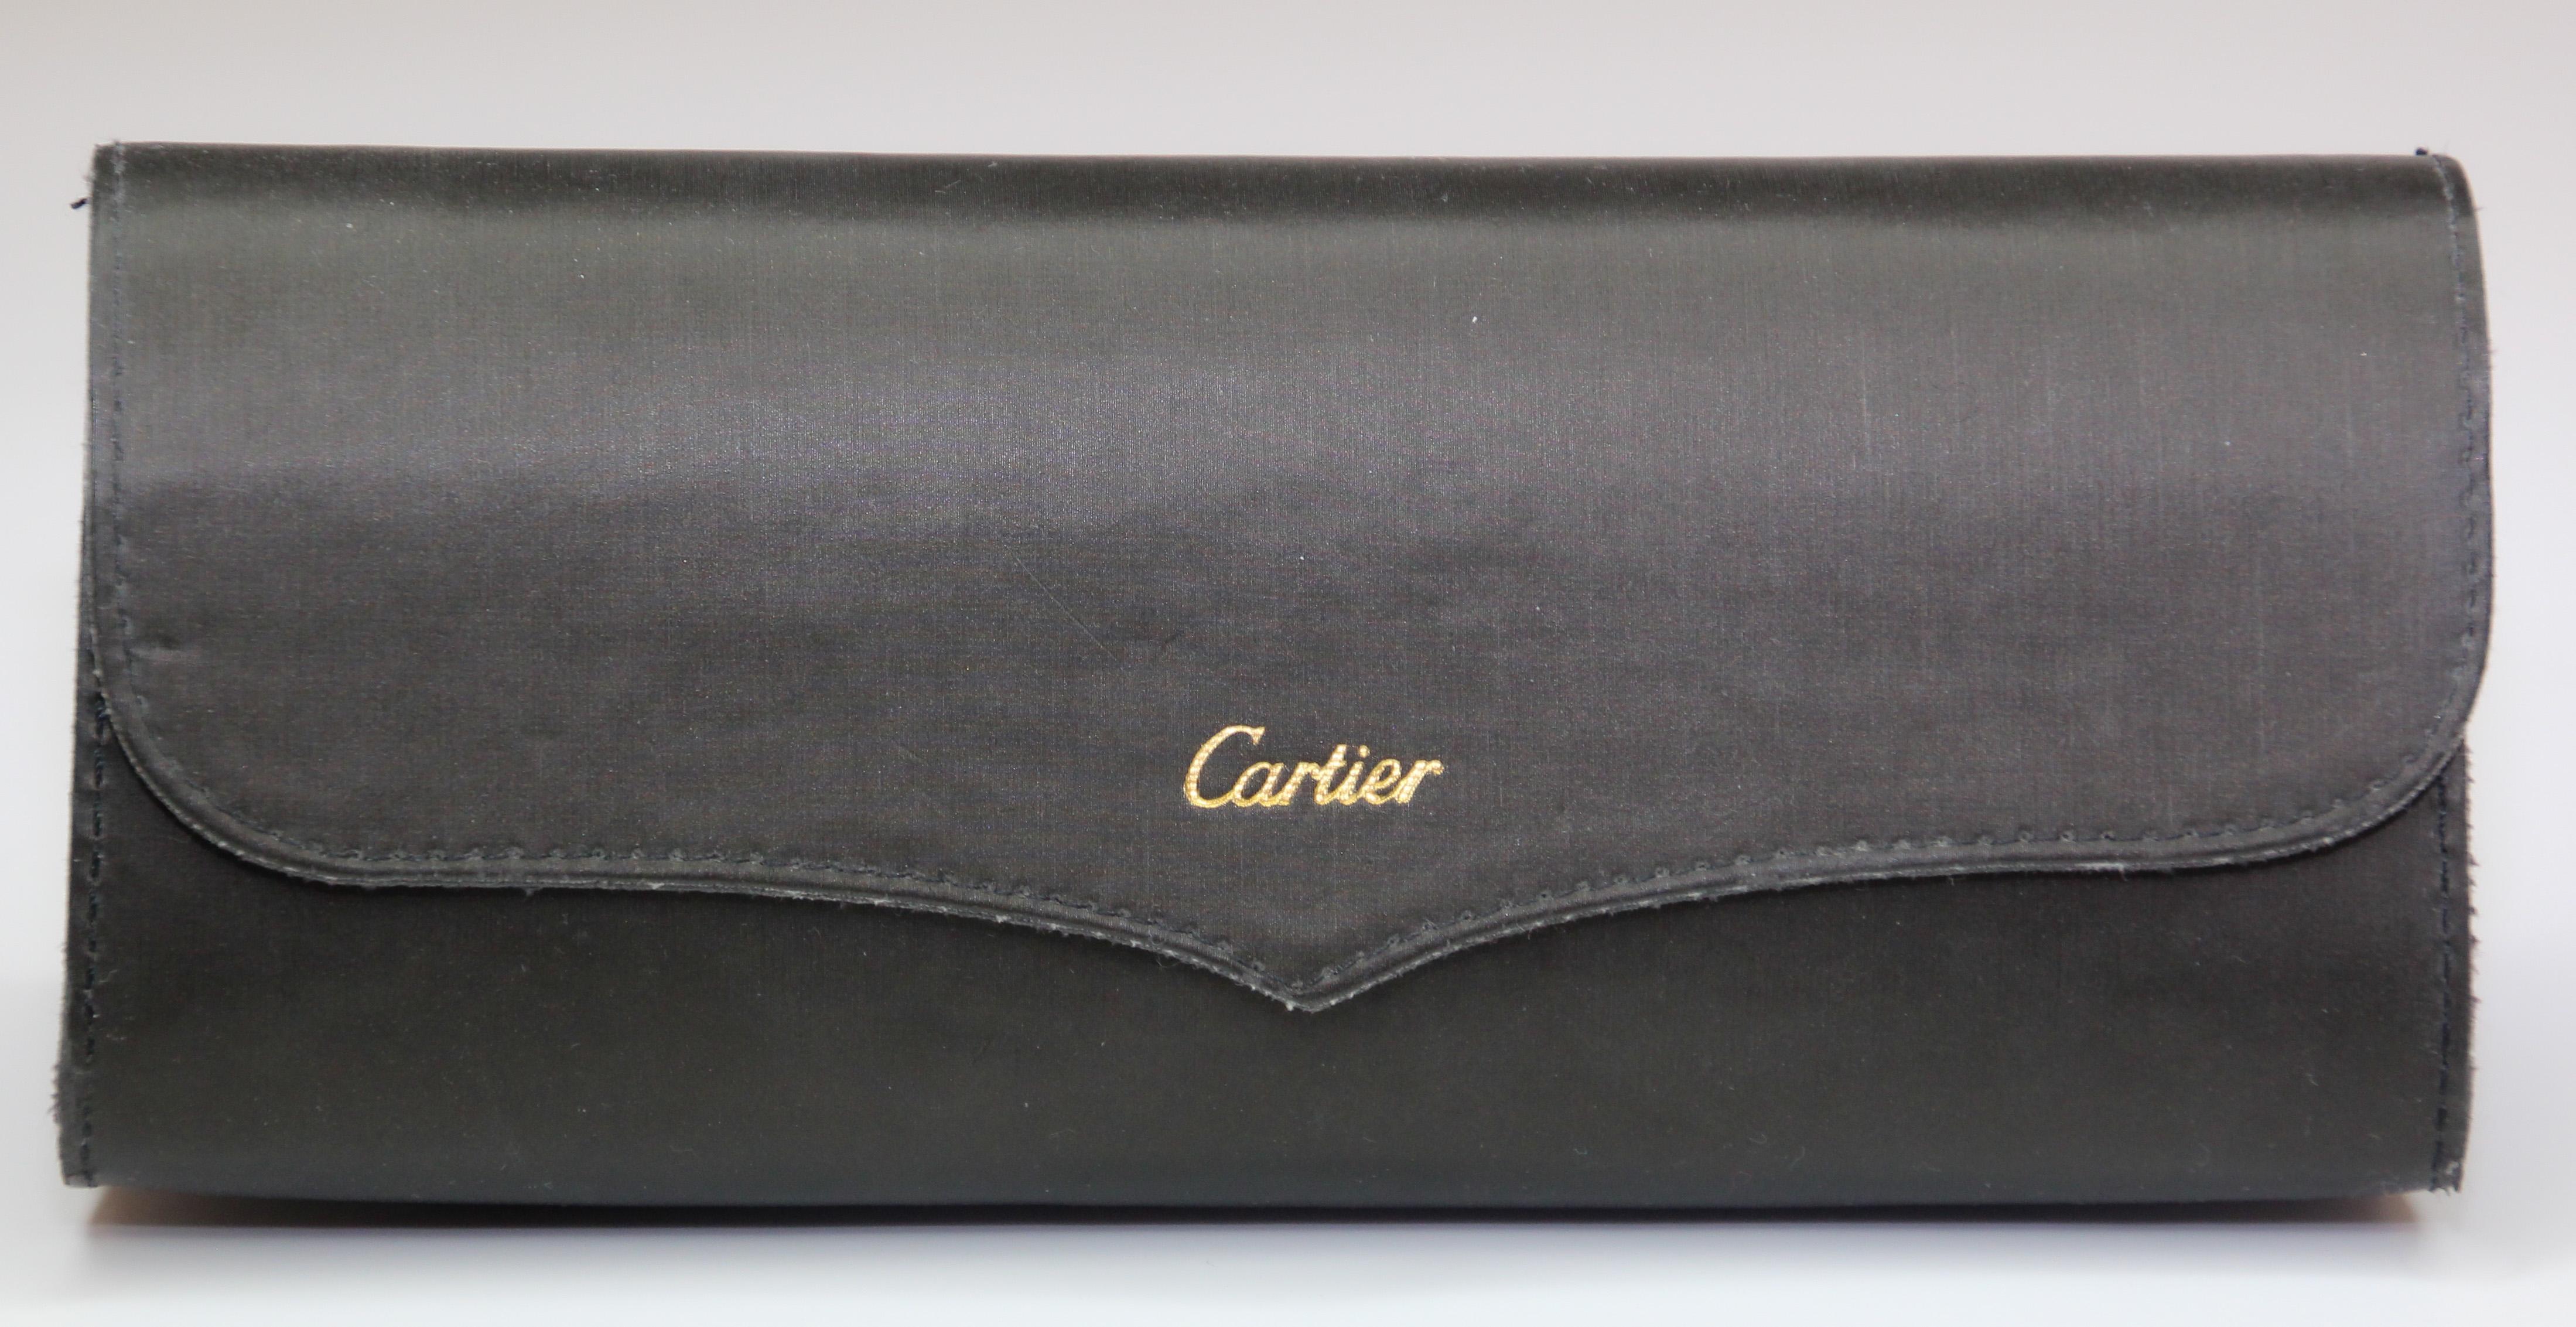 1990s Cartier Vintage Sunglasses Black with Silver Logo For Sale 8